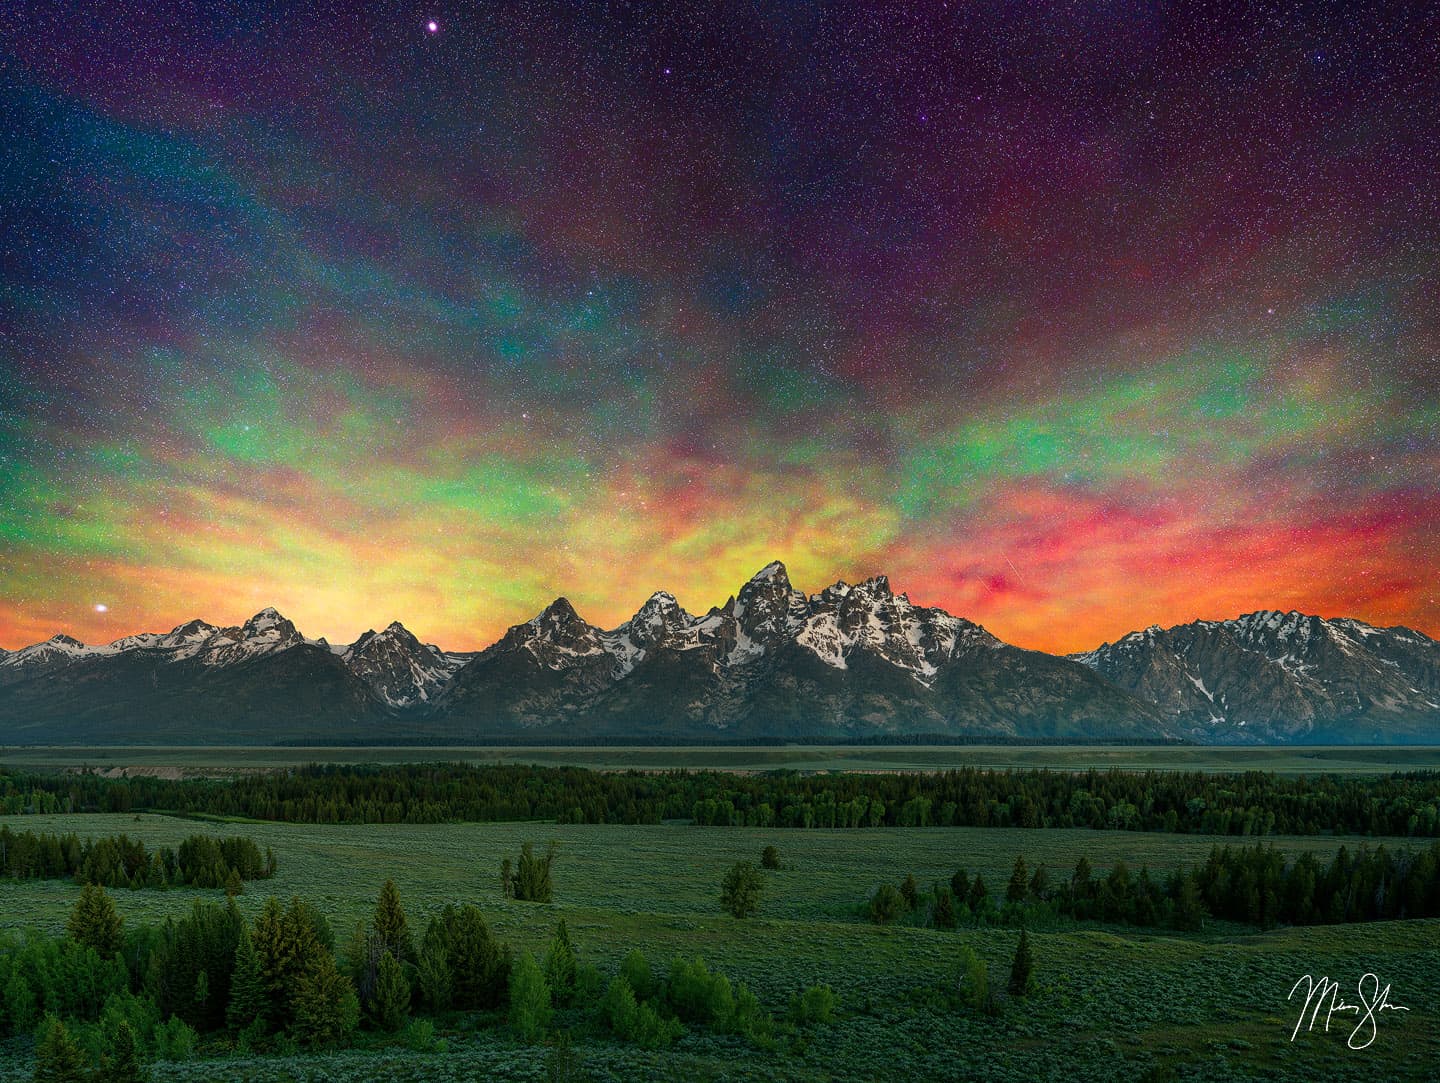 Airglow lights up the night sky above the Tetons